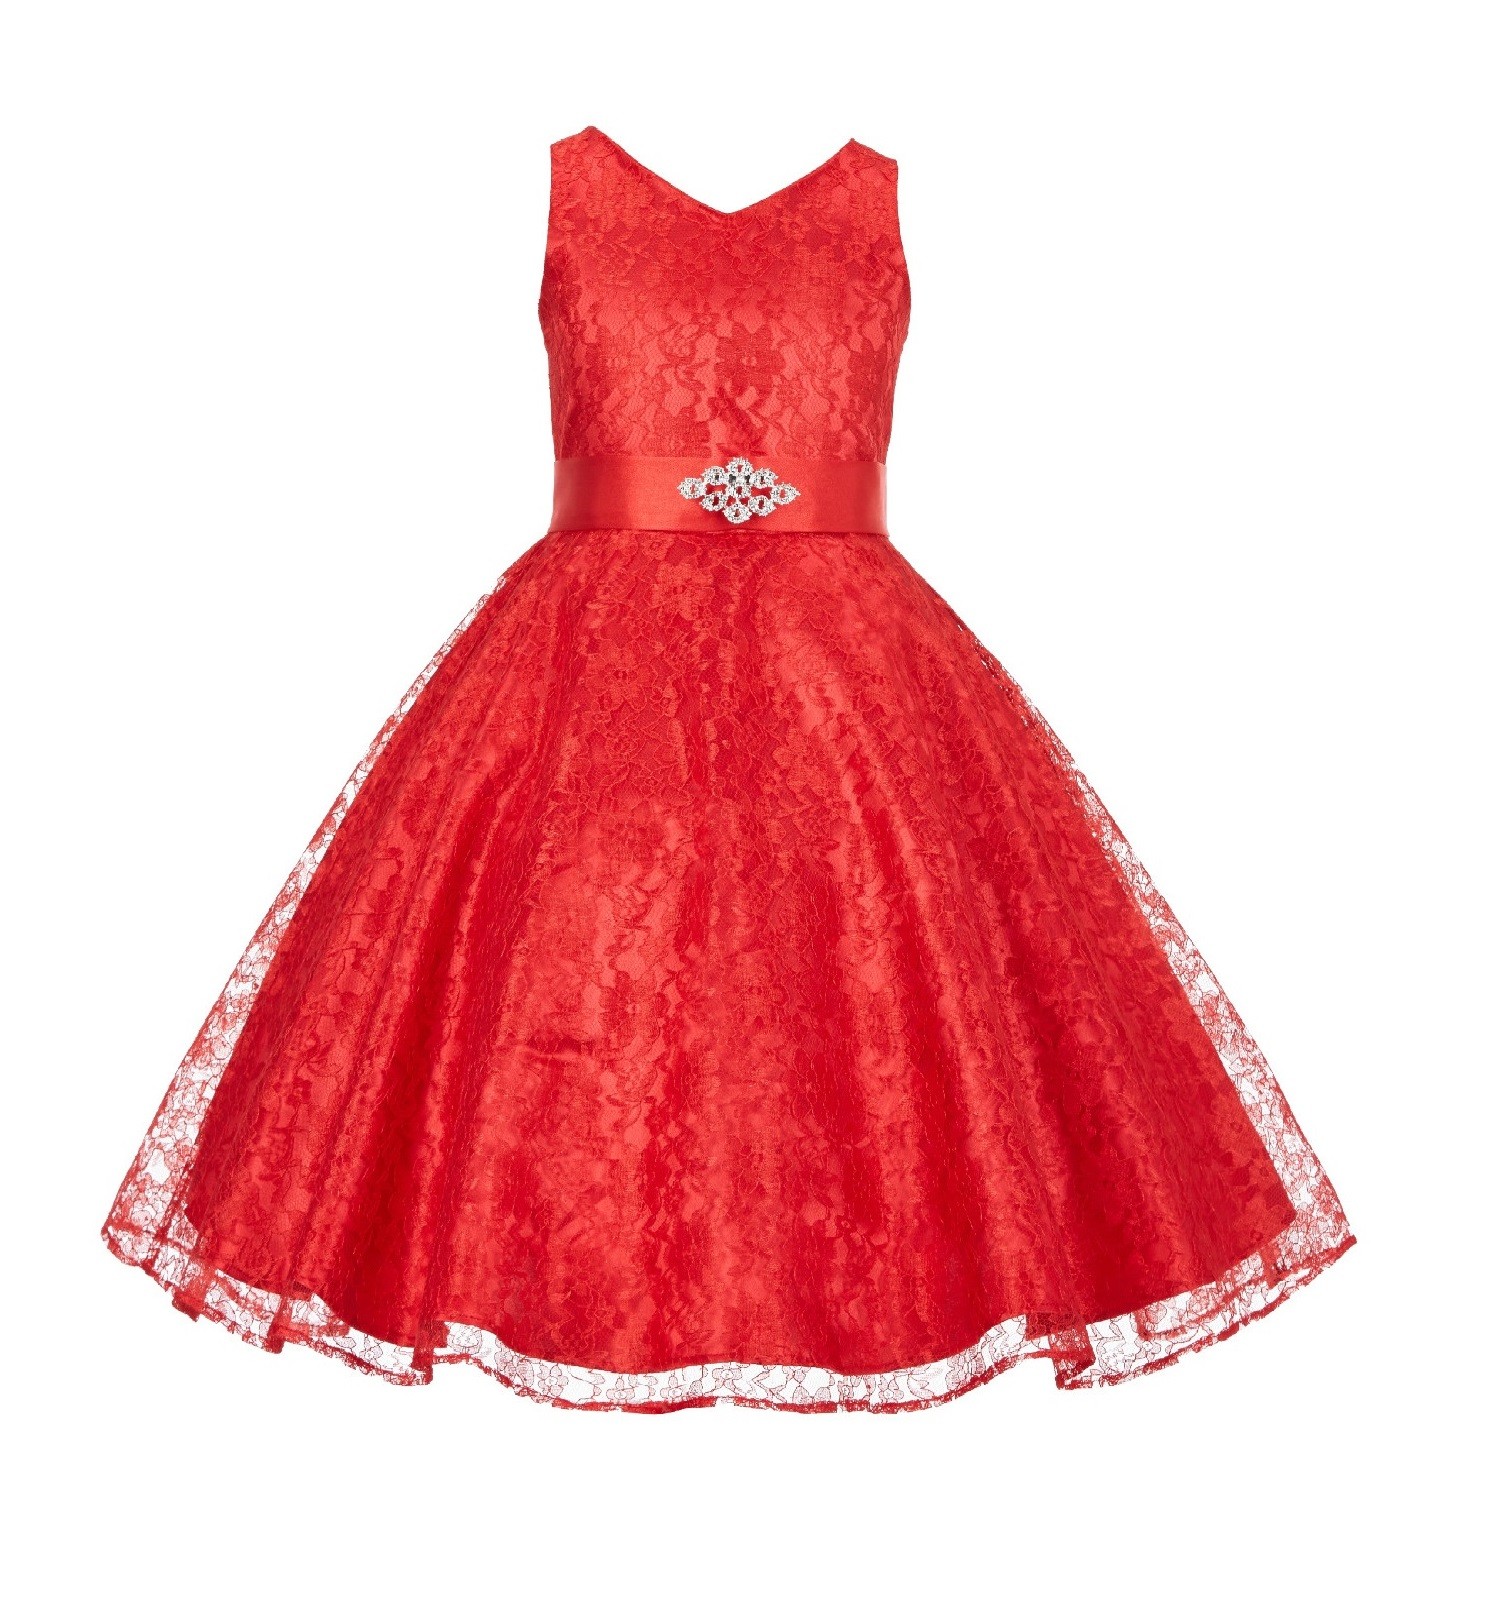 Red Floral Lace Overlay V-Neck Rhinestone Flower Girl Dress 166S